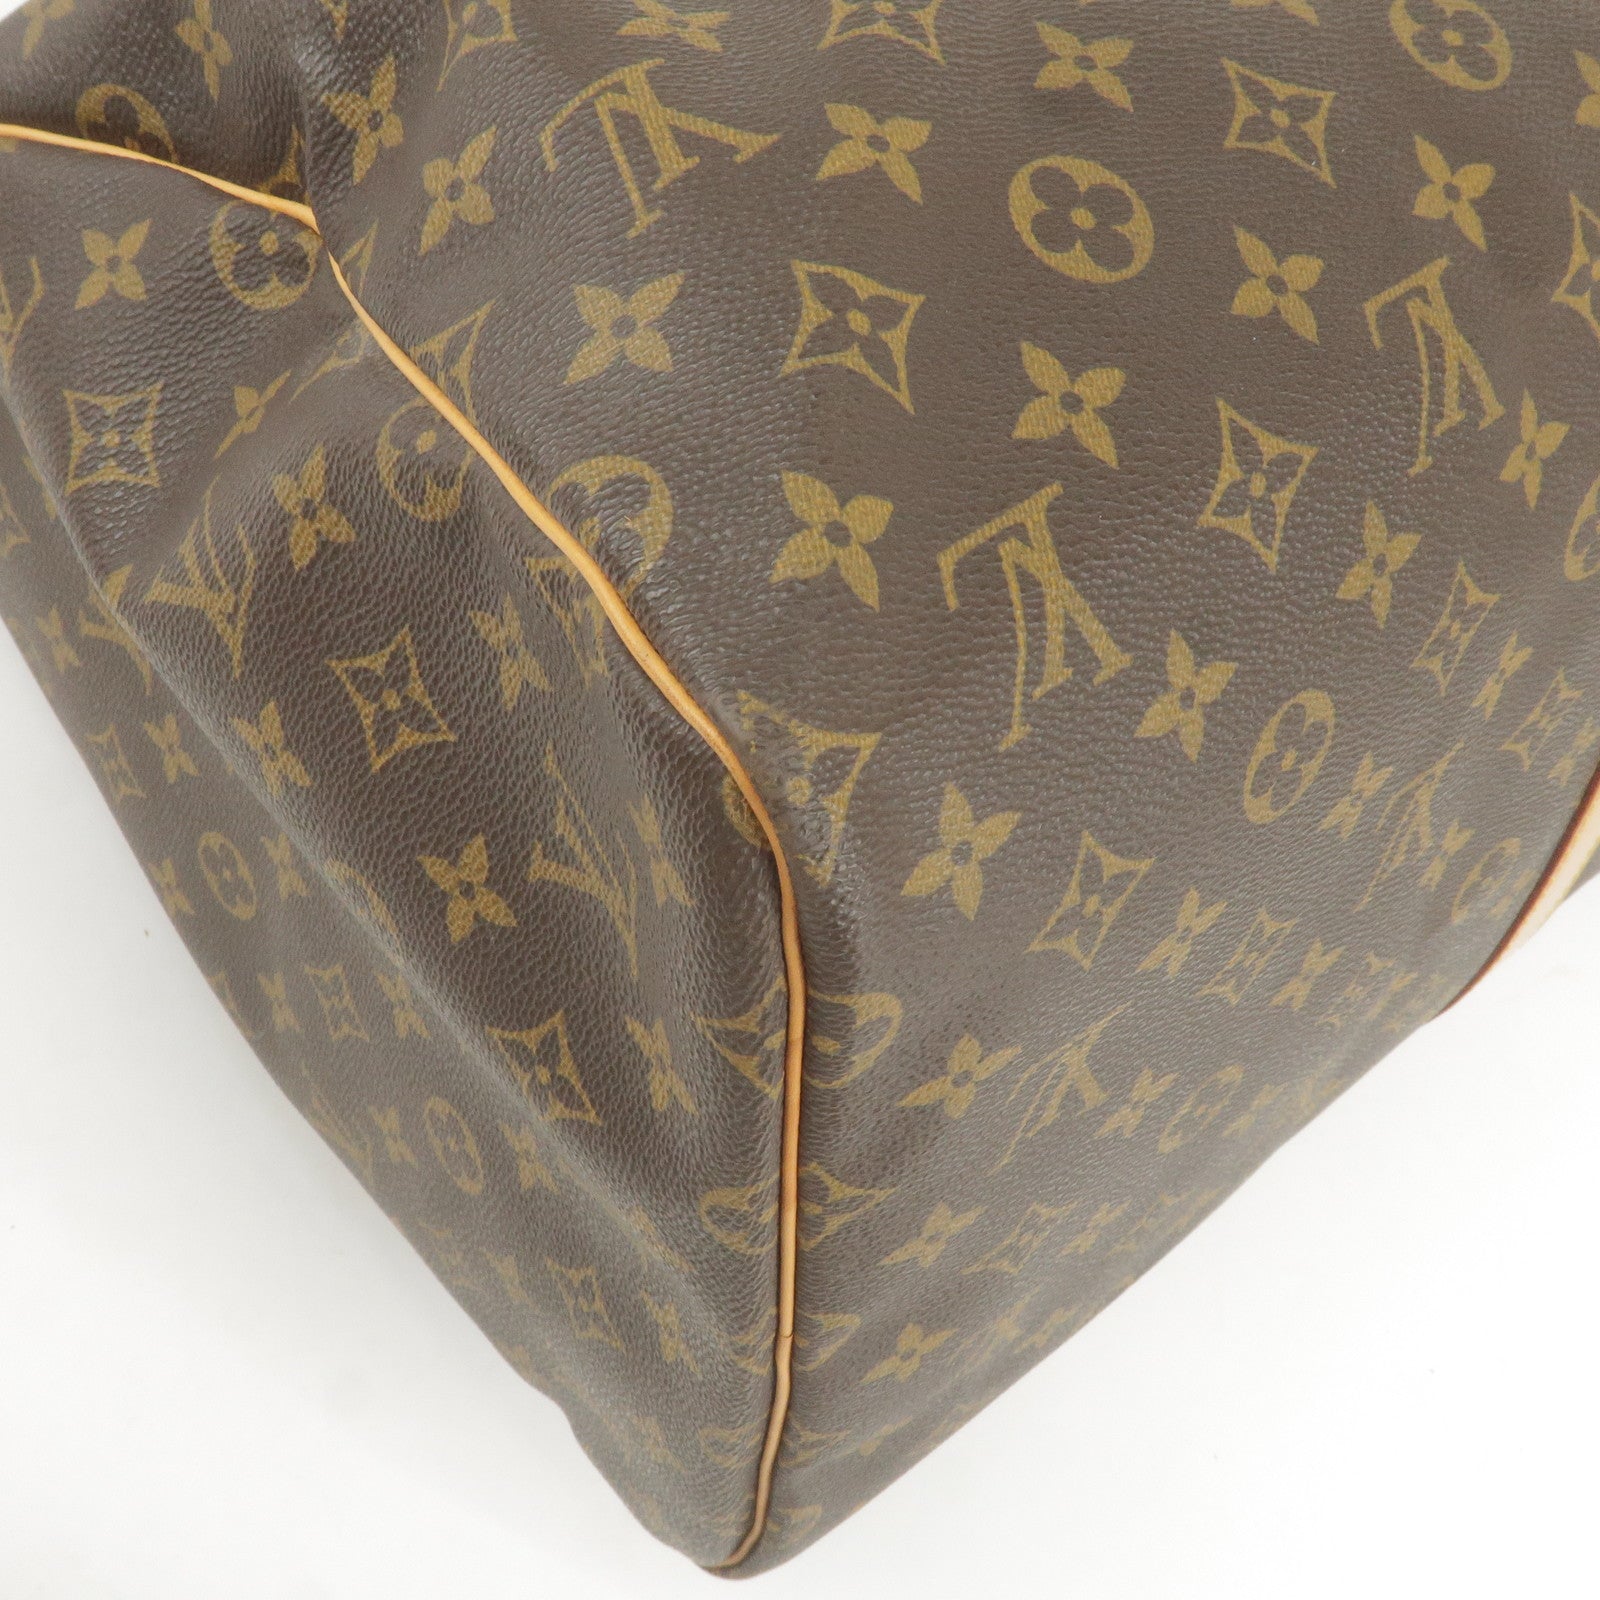 55 - Keep - Style - Monogram - Old - Vuitton - Bag - ep_vintage luxury  Store - Boston - M41424 – dct - Louis - All - Louis Vuitton 1994 pre-owned  Speedy 25 tote bag